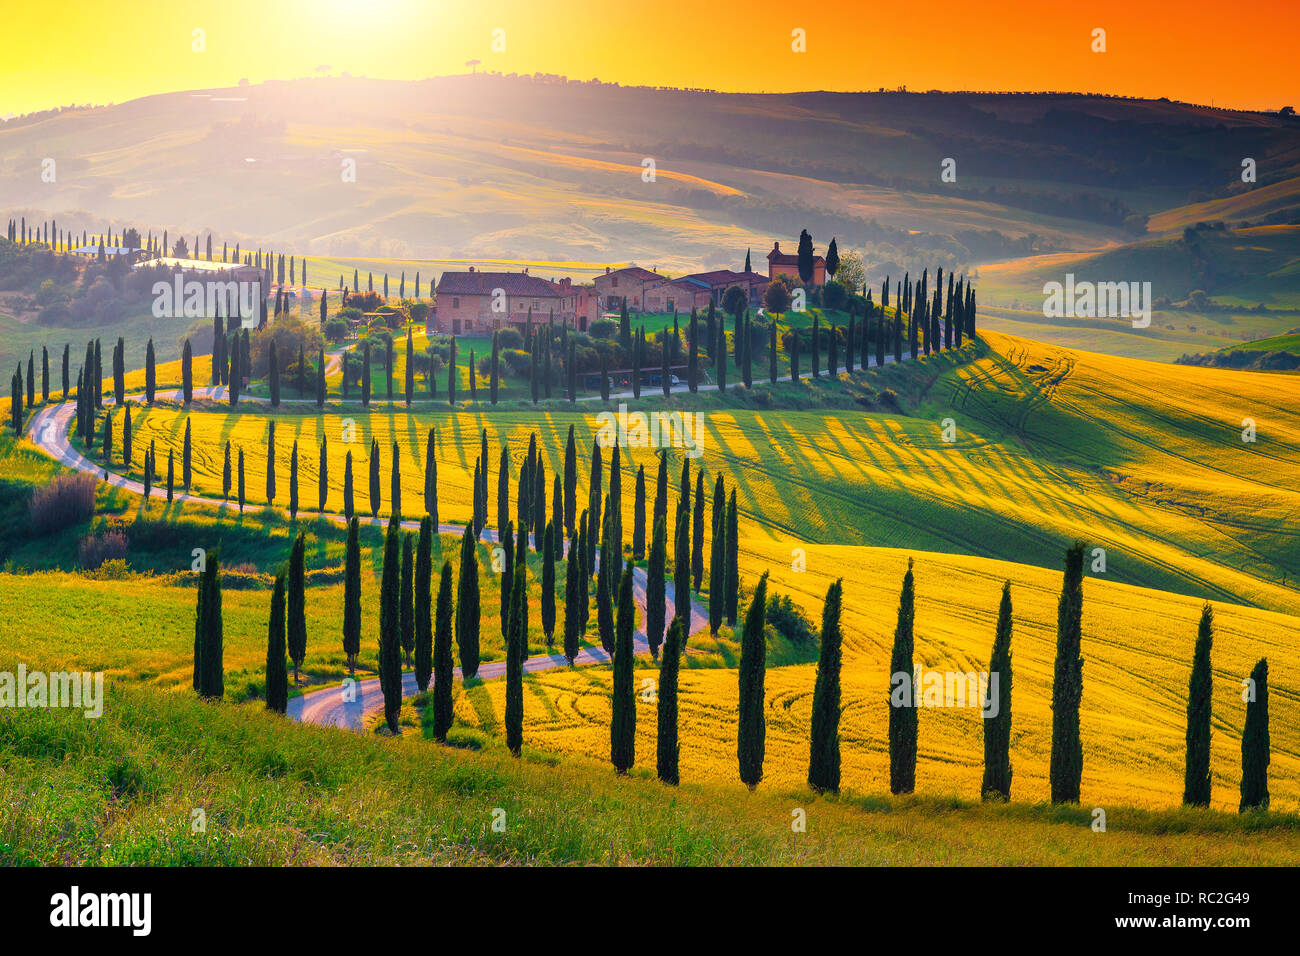 Famous popular travel and photography place. Majestic colorful sunset and agricultural field with typical Tuscany stone houses on the hill, near Siena Stock Photo